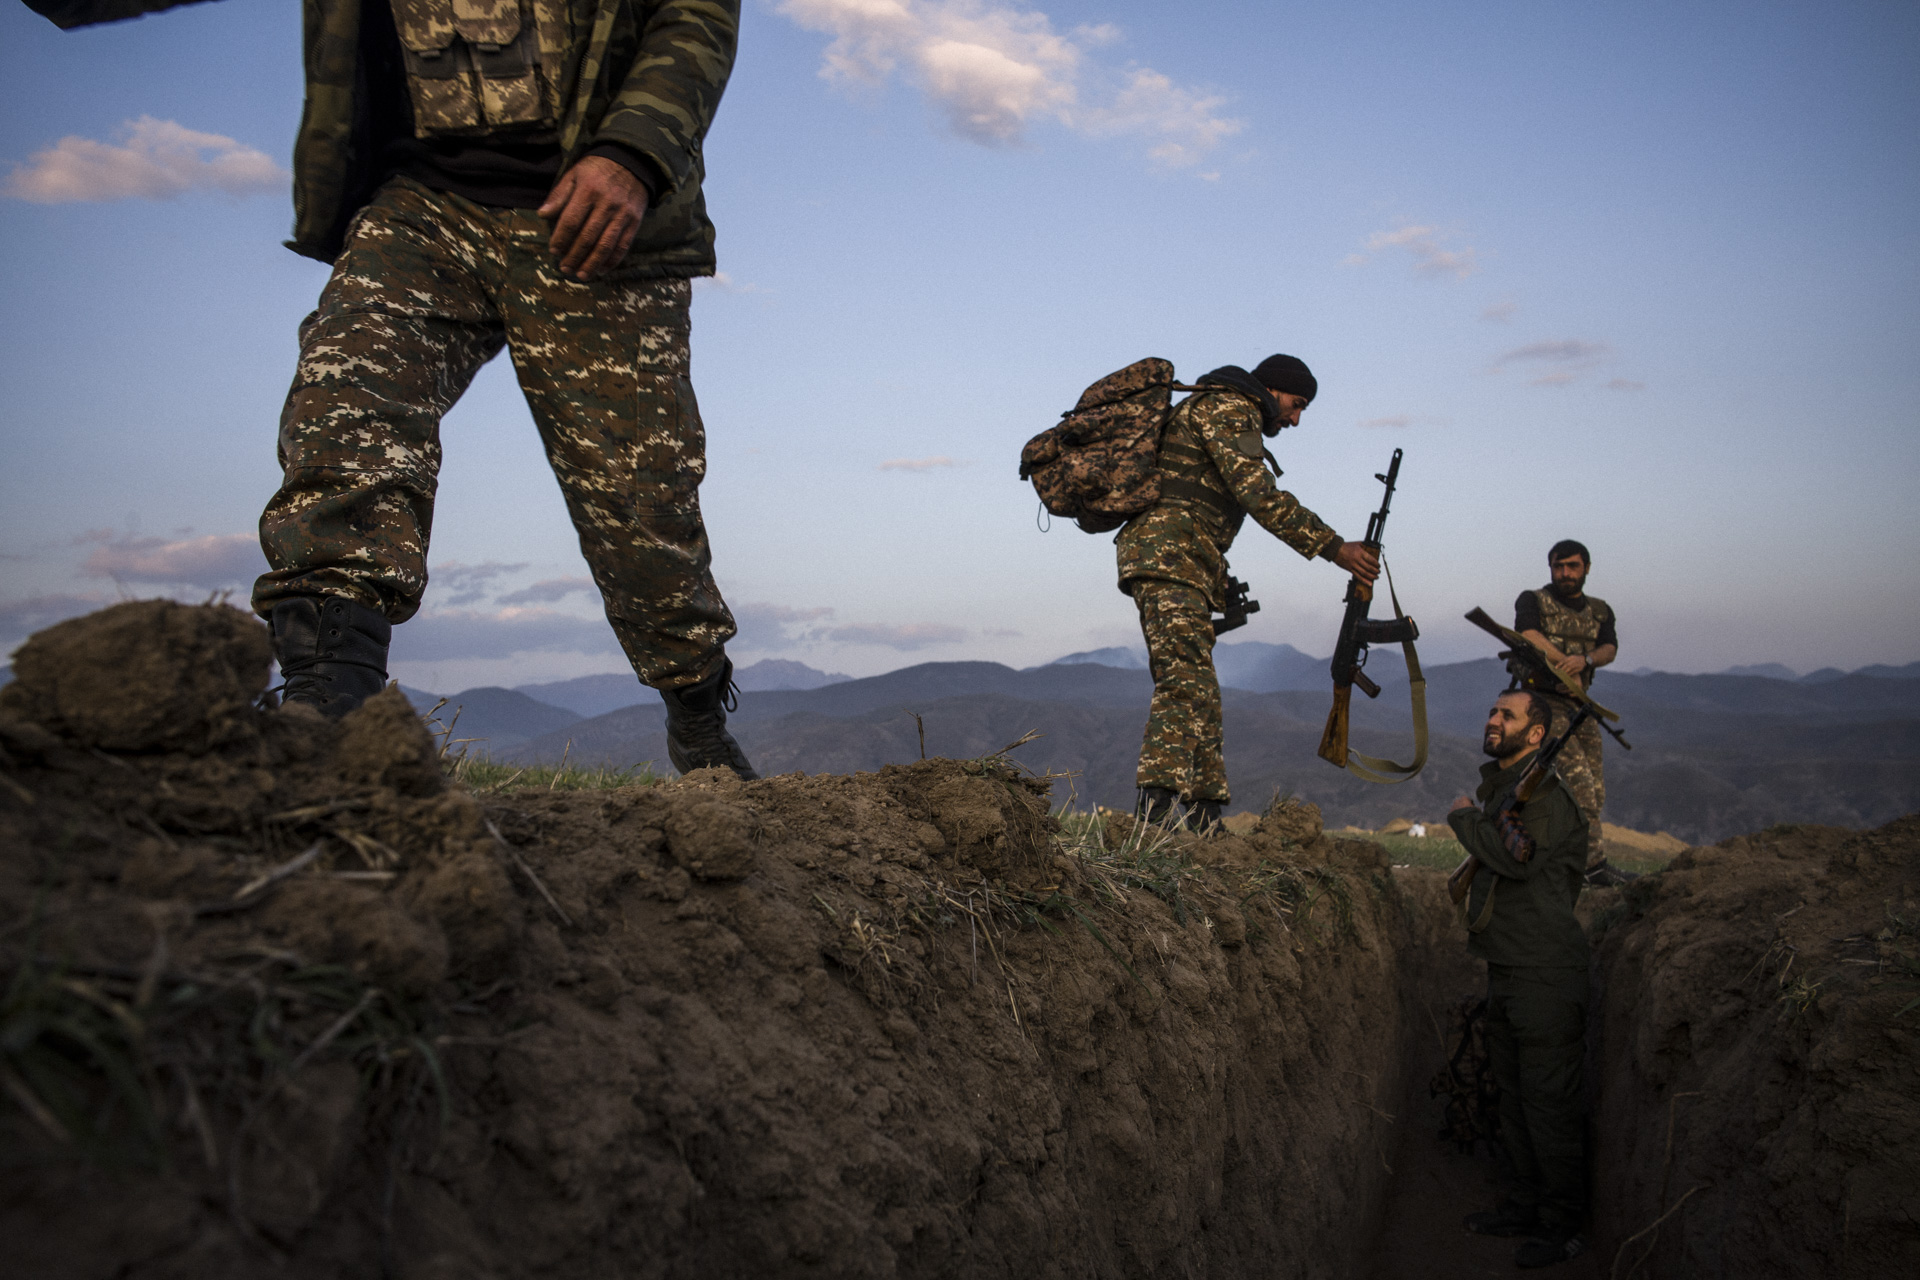 NAGORNO-KARABAKH: BEHIND THE SCENES OF THE LAST FEW HOURS